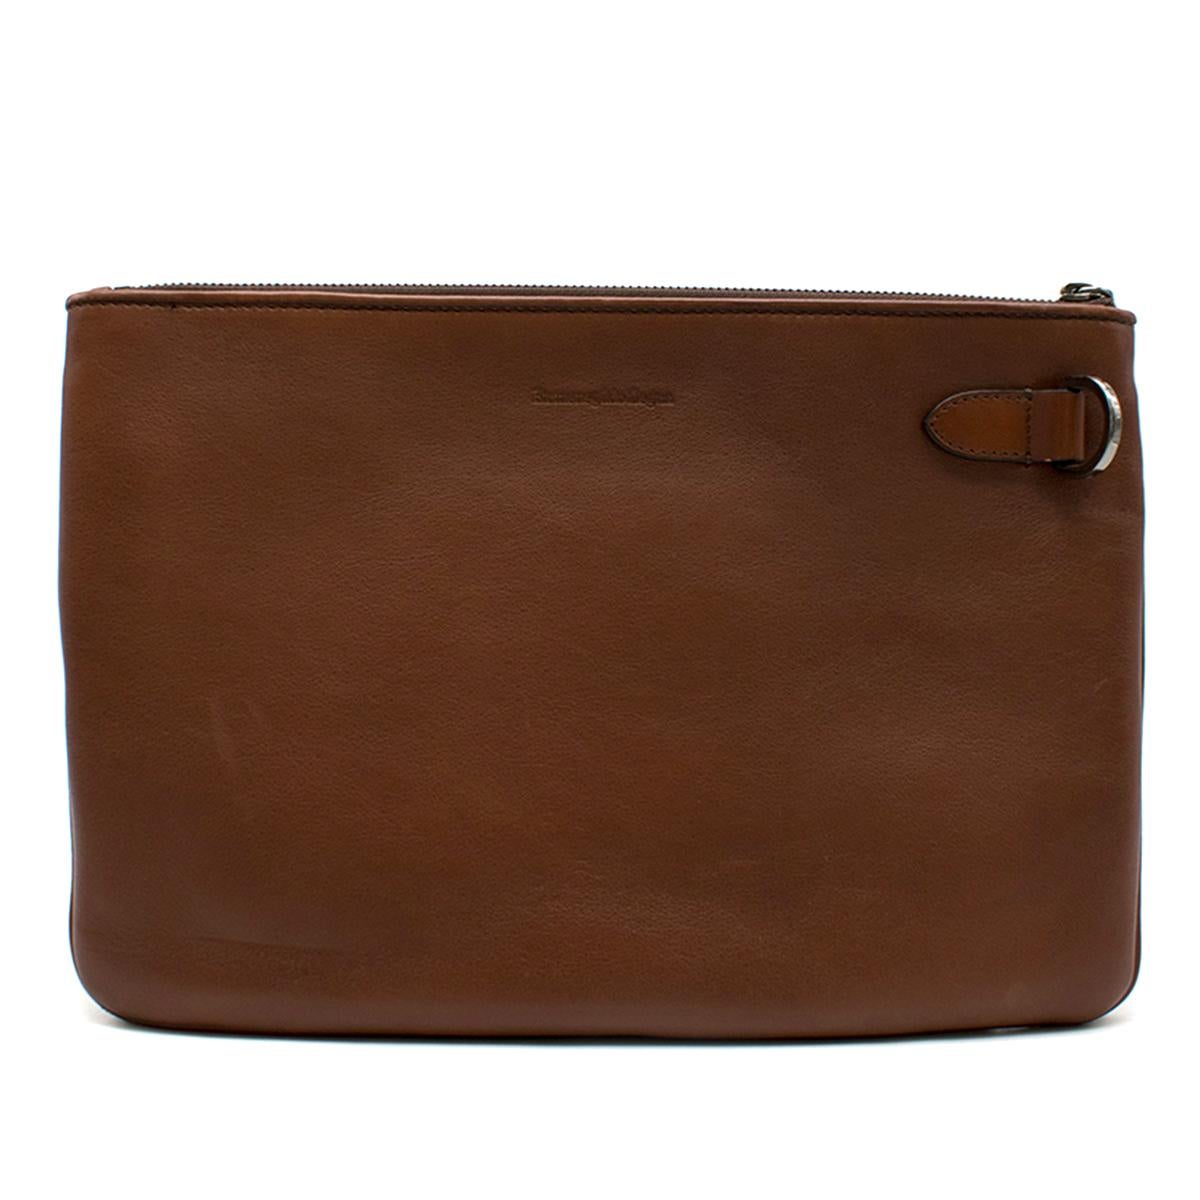 Ermenegildo Zegna Brown Woven Leather Pouch 

- Brown Pouch Case 
- Handwoven leather back panel
- Embossed logo on smooth panel 
- Zip fastening closure at top
- Suede lining, dual slip pockets

This item comes with a dust bag. 

Please note, these